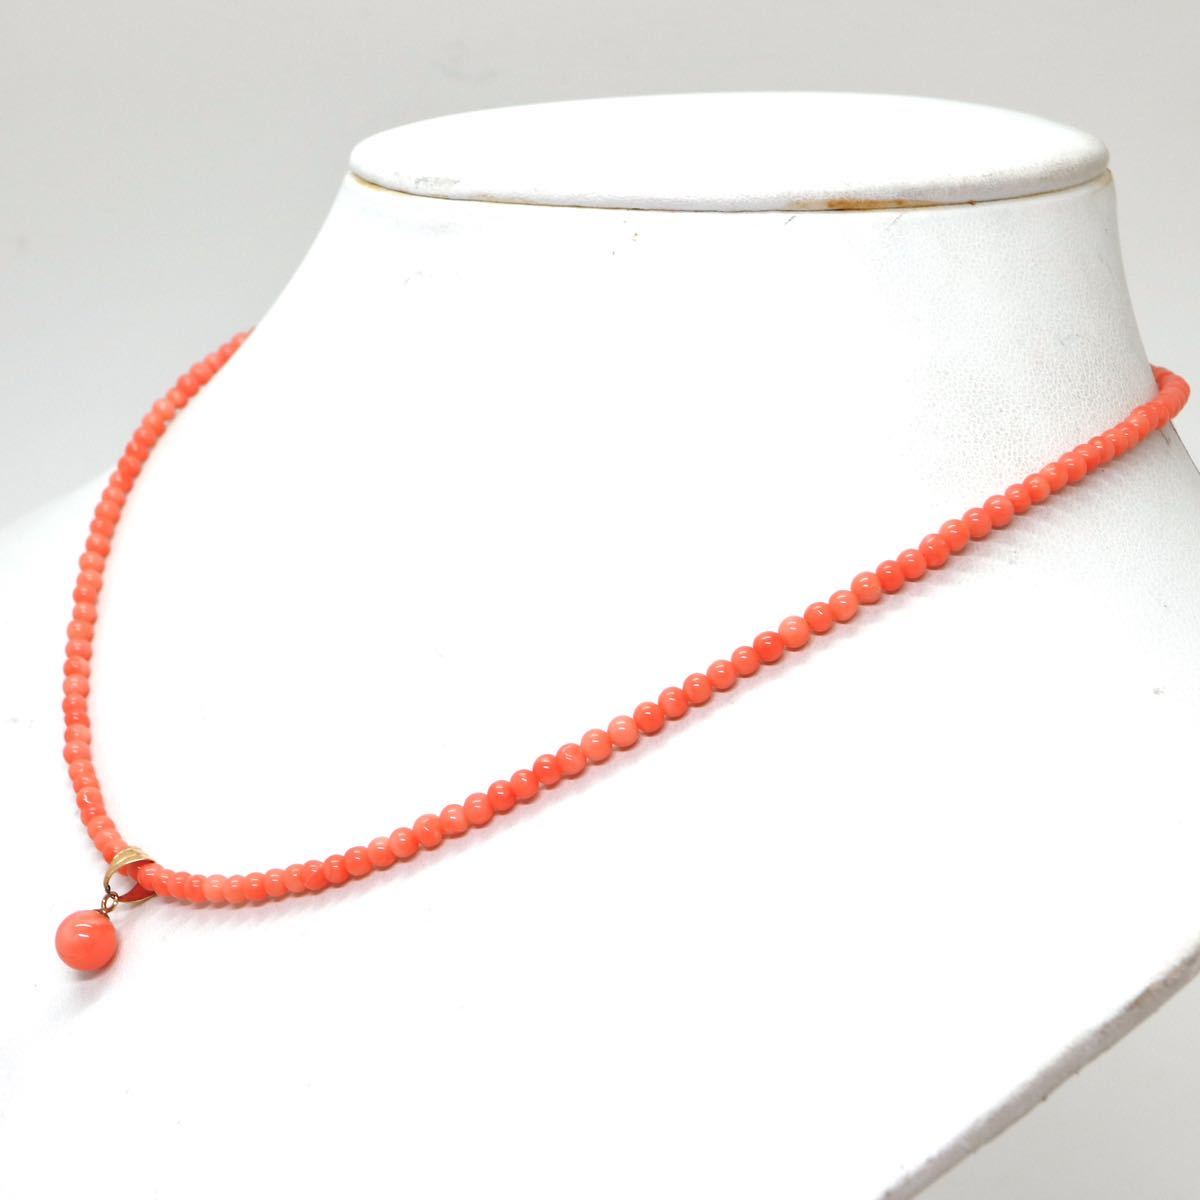 《K18天然桃珊瑚ネックレス》D 3.0/6.0mm珠　5.4g 42cm coral necklace ジュエリー jewelry DC0/DC0_画像3